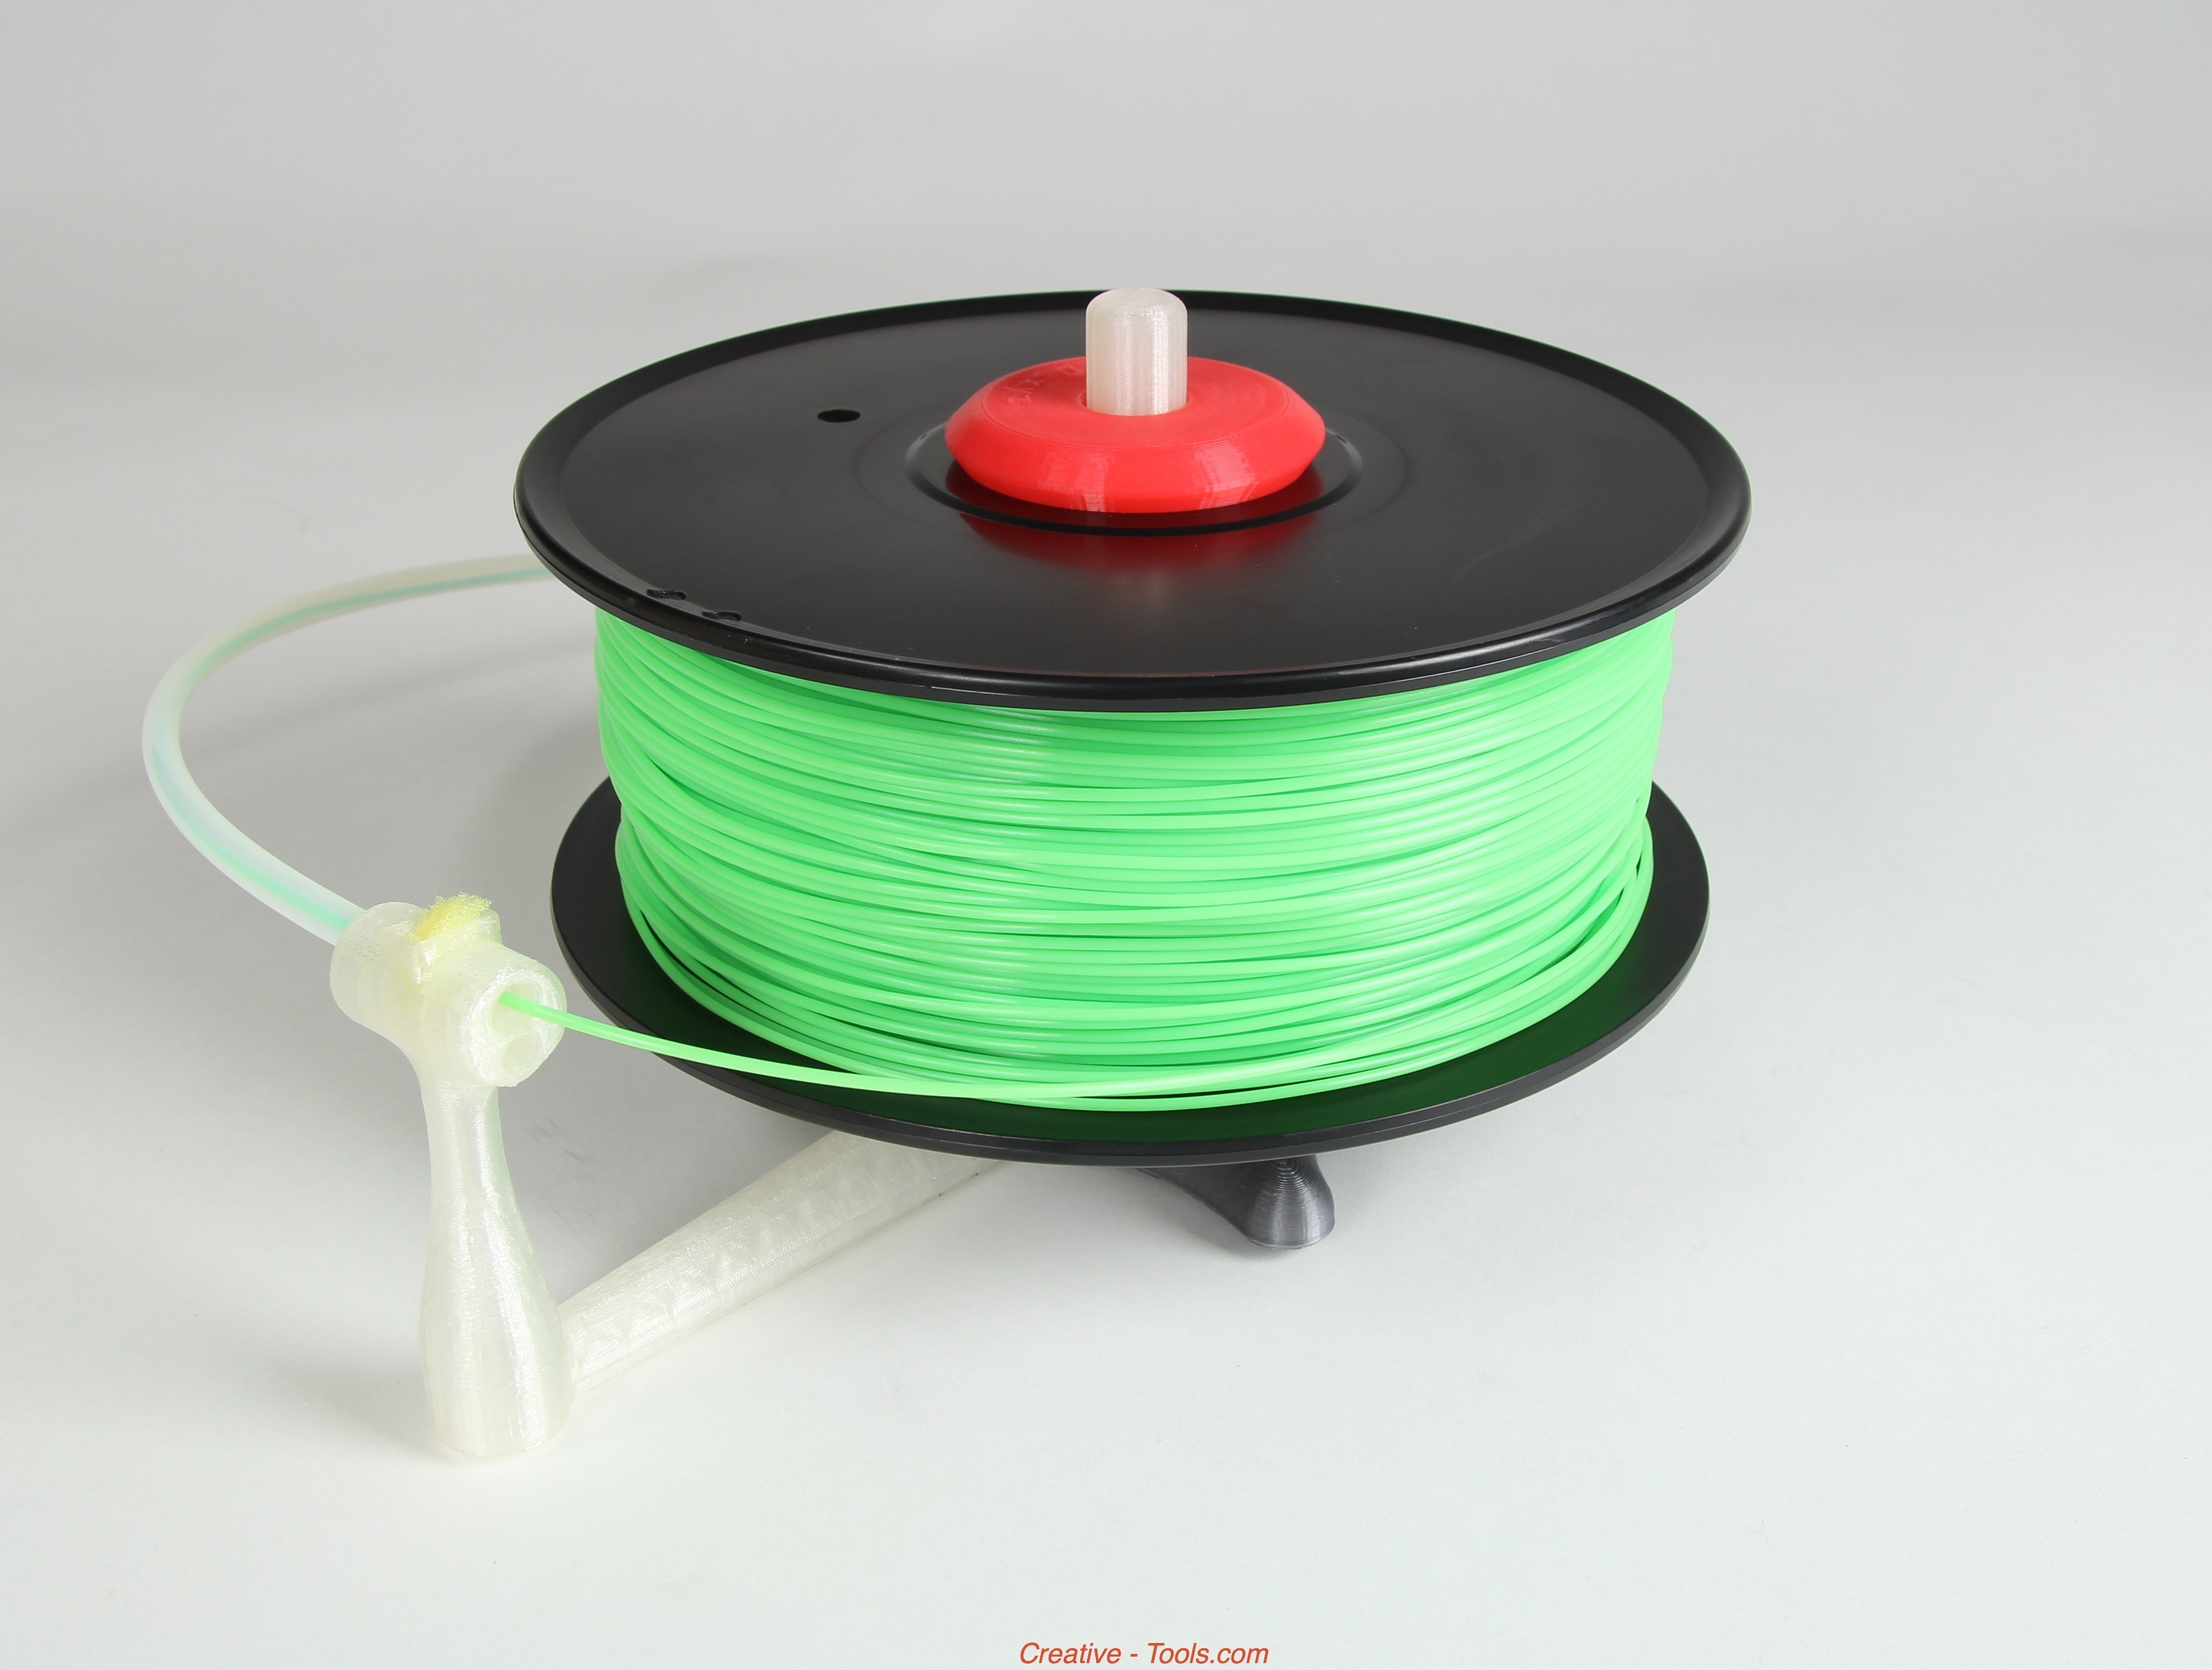 Universal stand-alone filament spool holder (Fully 3D-printable)